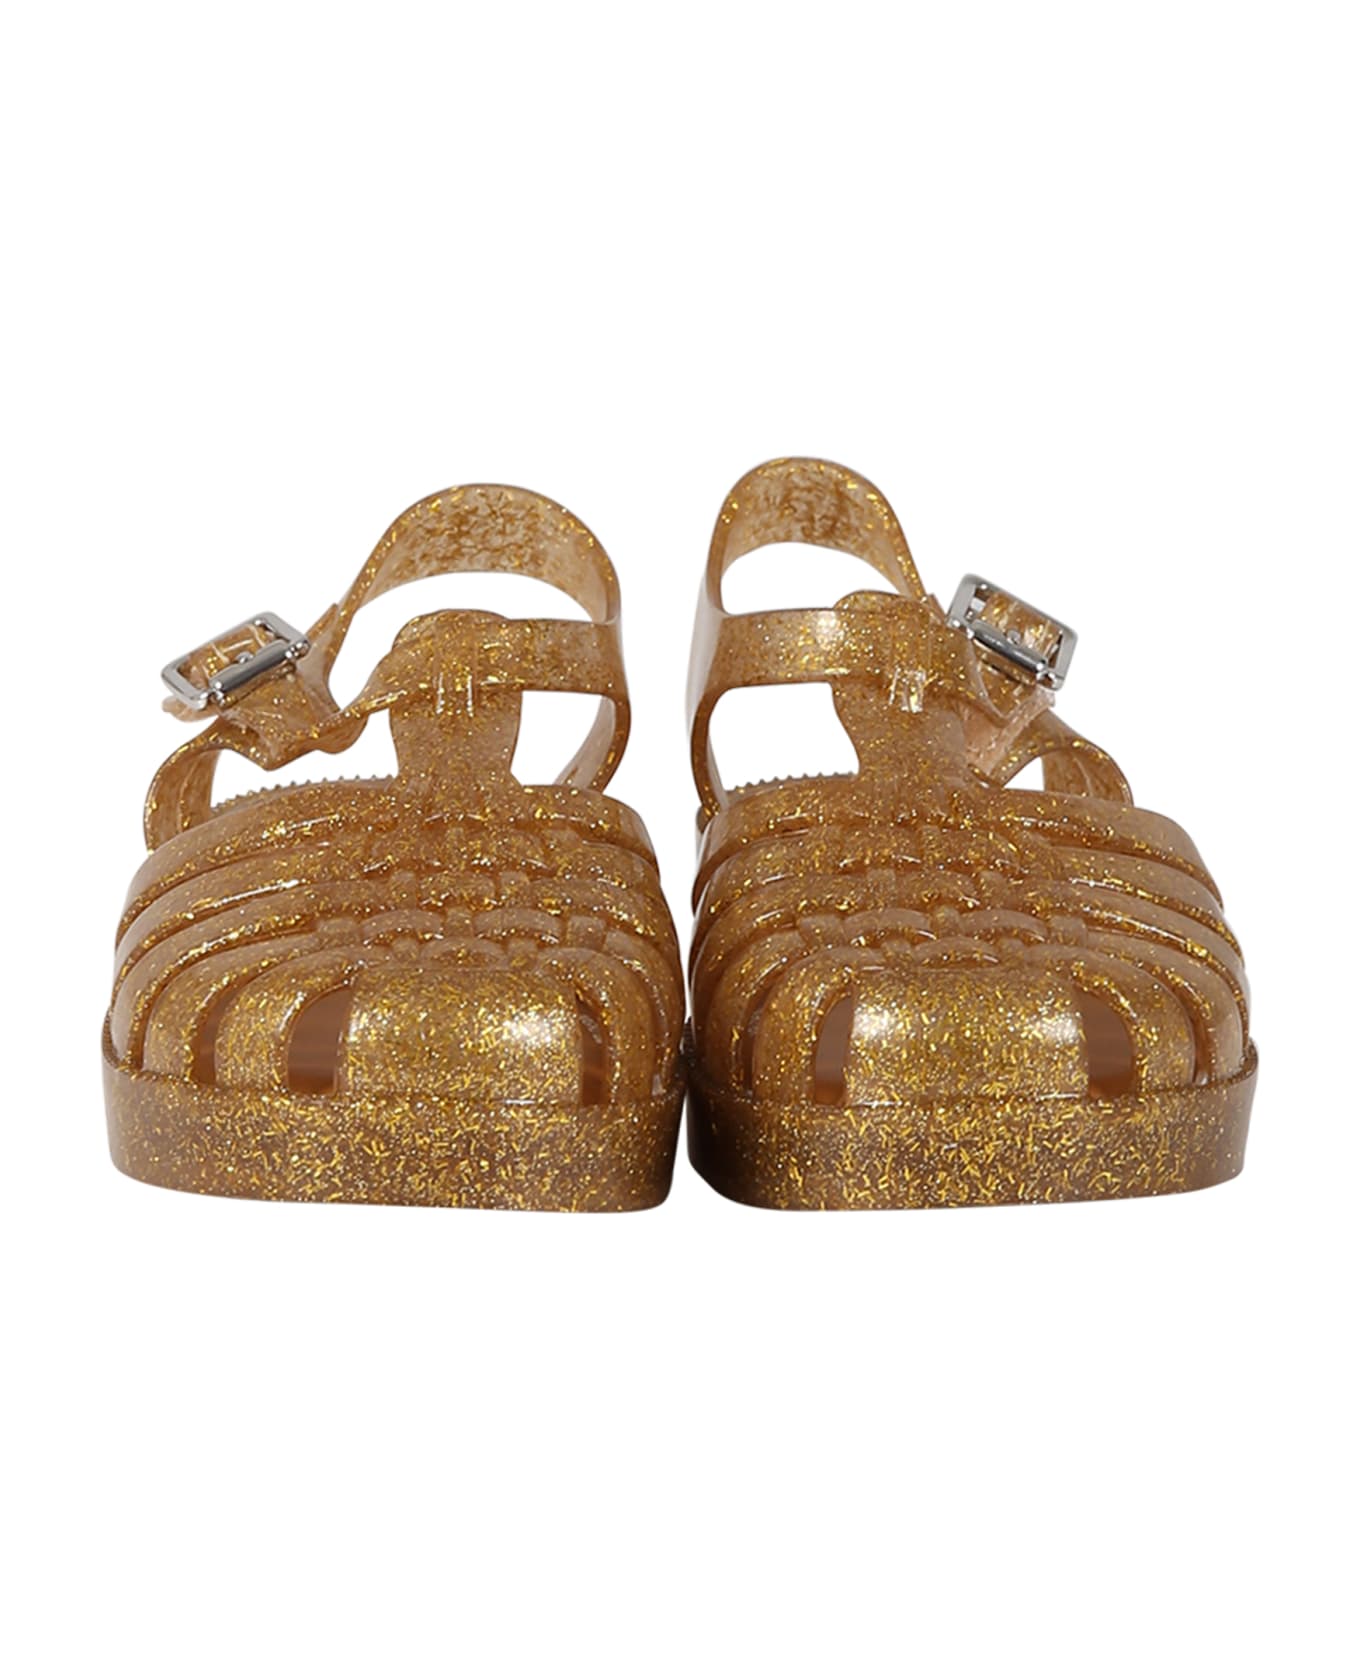 Melissa Gold Scented Sandals For Girl With Logo - Gold シューズ